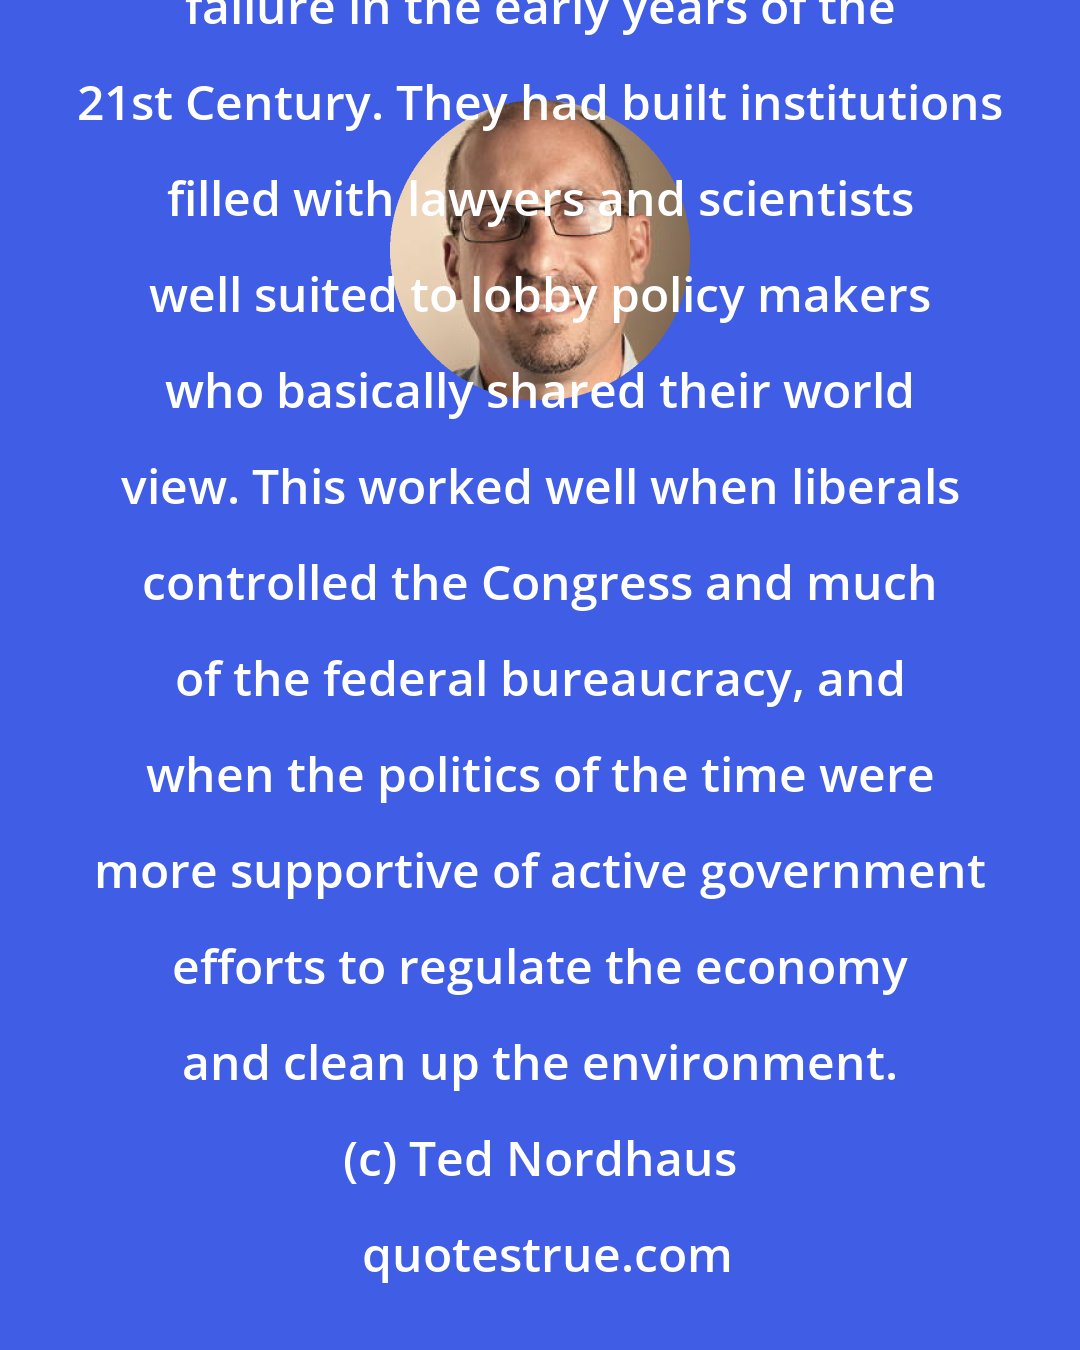 Ted Nordhaus: The great successes of the modern environmental movement in the '60s and '70s had laid the seeds of their failure in the early years of the 21st Century. They had built institutions filled with lawyers and scientists well suited to lobby policy makers who basically shared their world view. This worked well when liberals controlled the Congress and much of the federal bureaucracy, and when the politics of the time were more supportive of active government efforts to regulate the economy and clean up the environment.